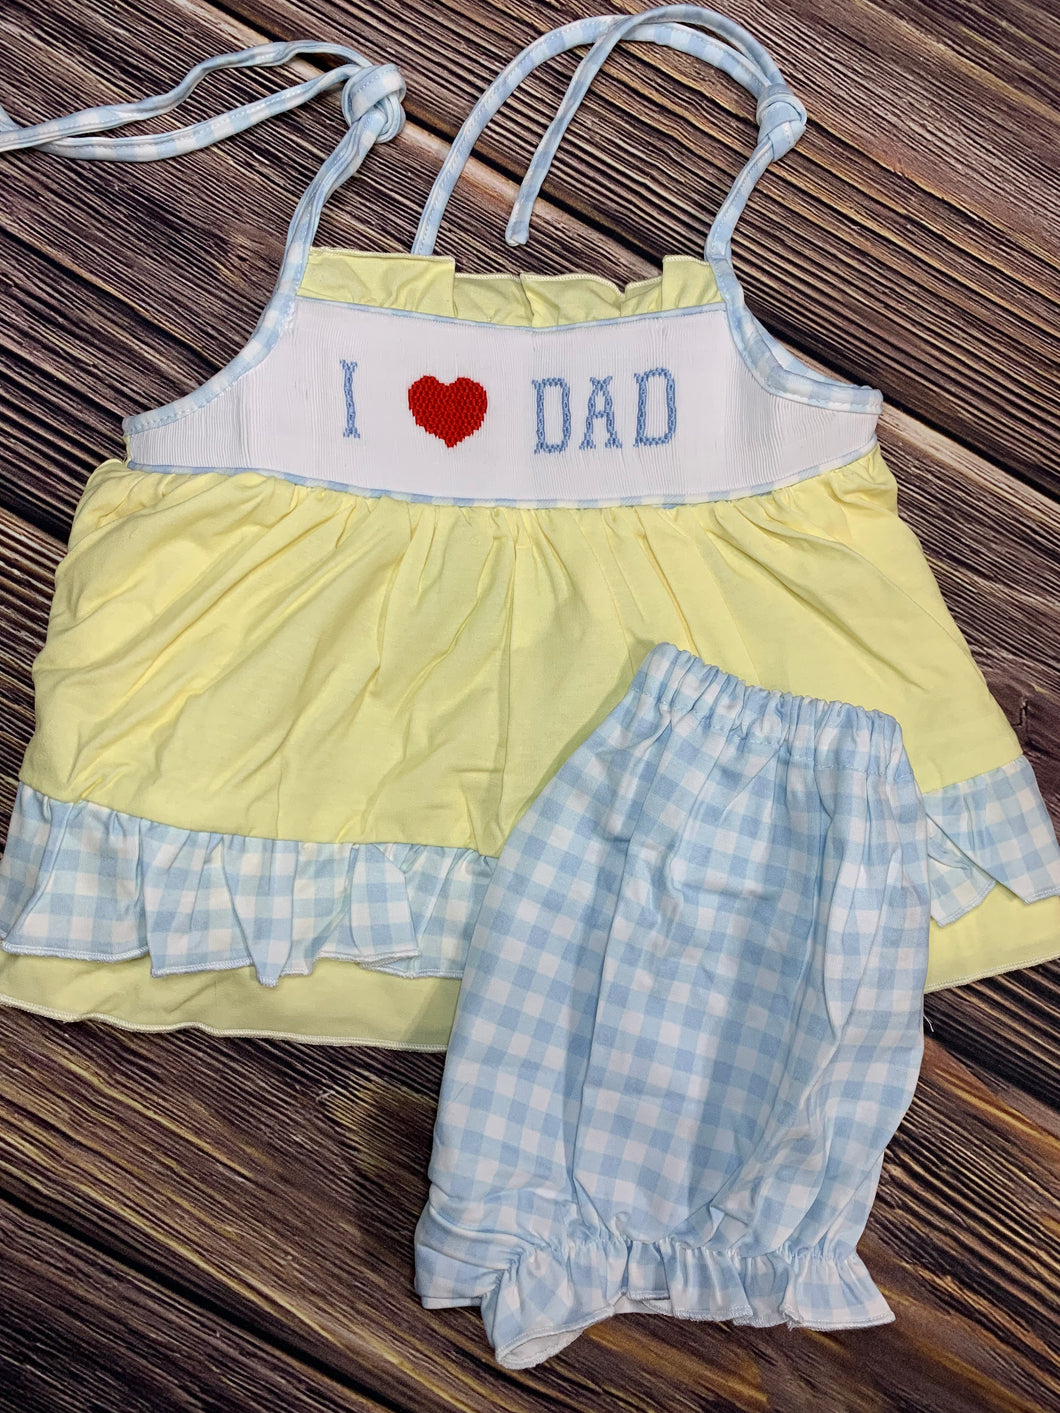 I Love Dad Hand Smocked Yellow and Blue Knit Bloomer Set